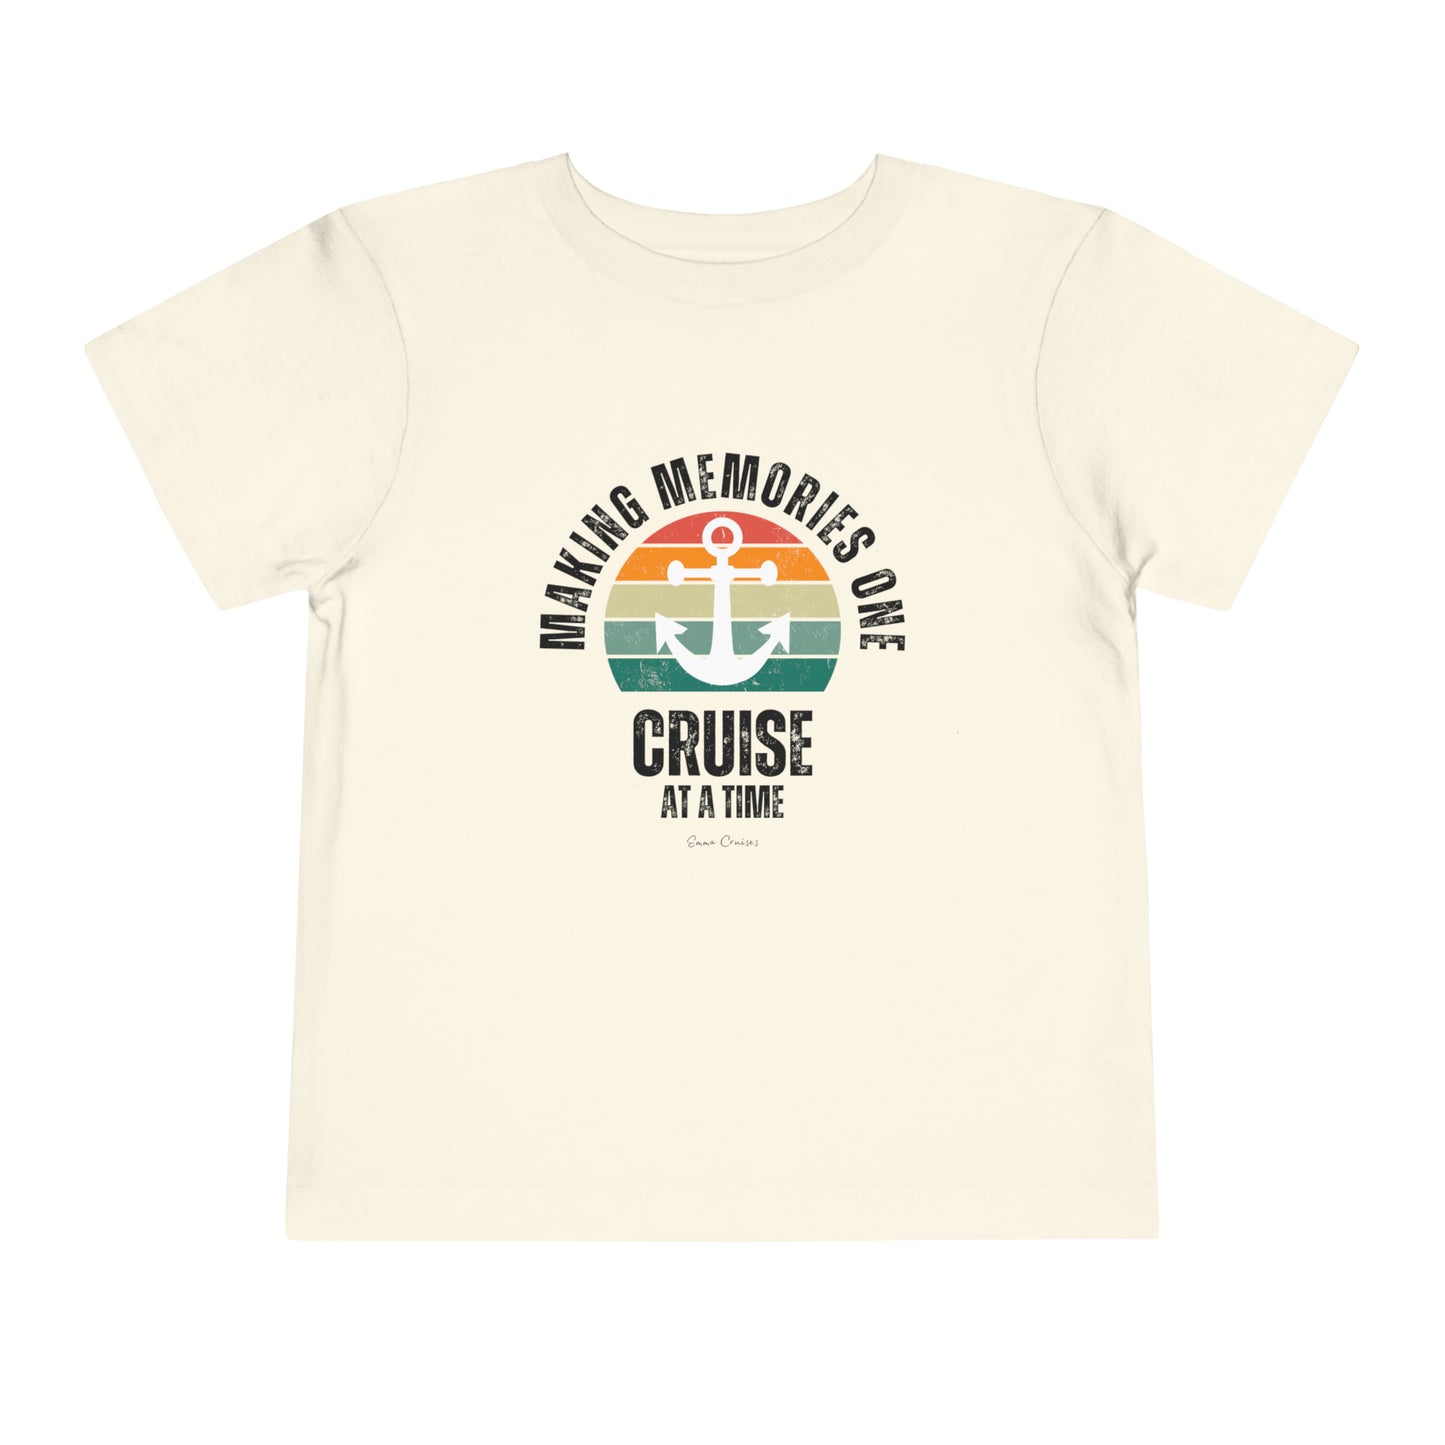 Making Memories One Cruise at a Time - Toddler UNISEX T-Shirt